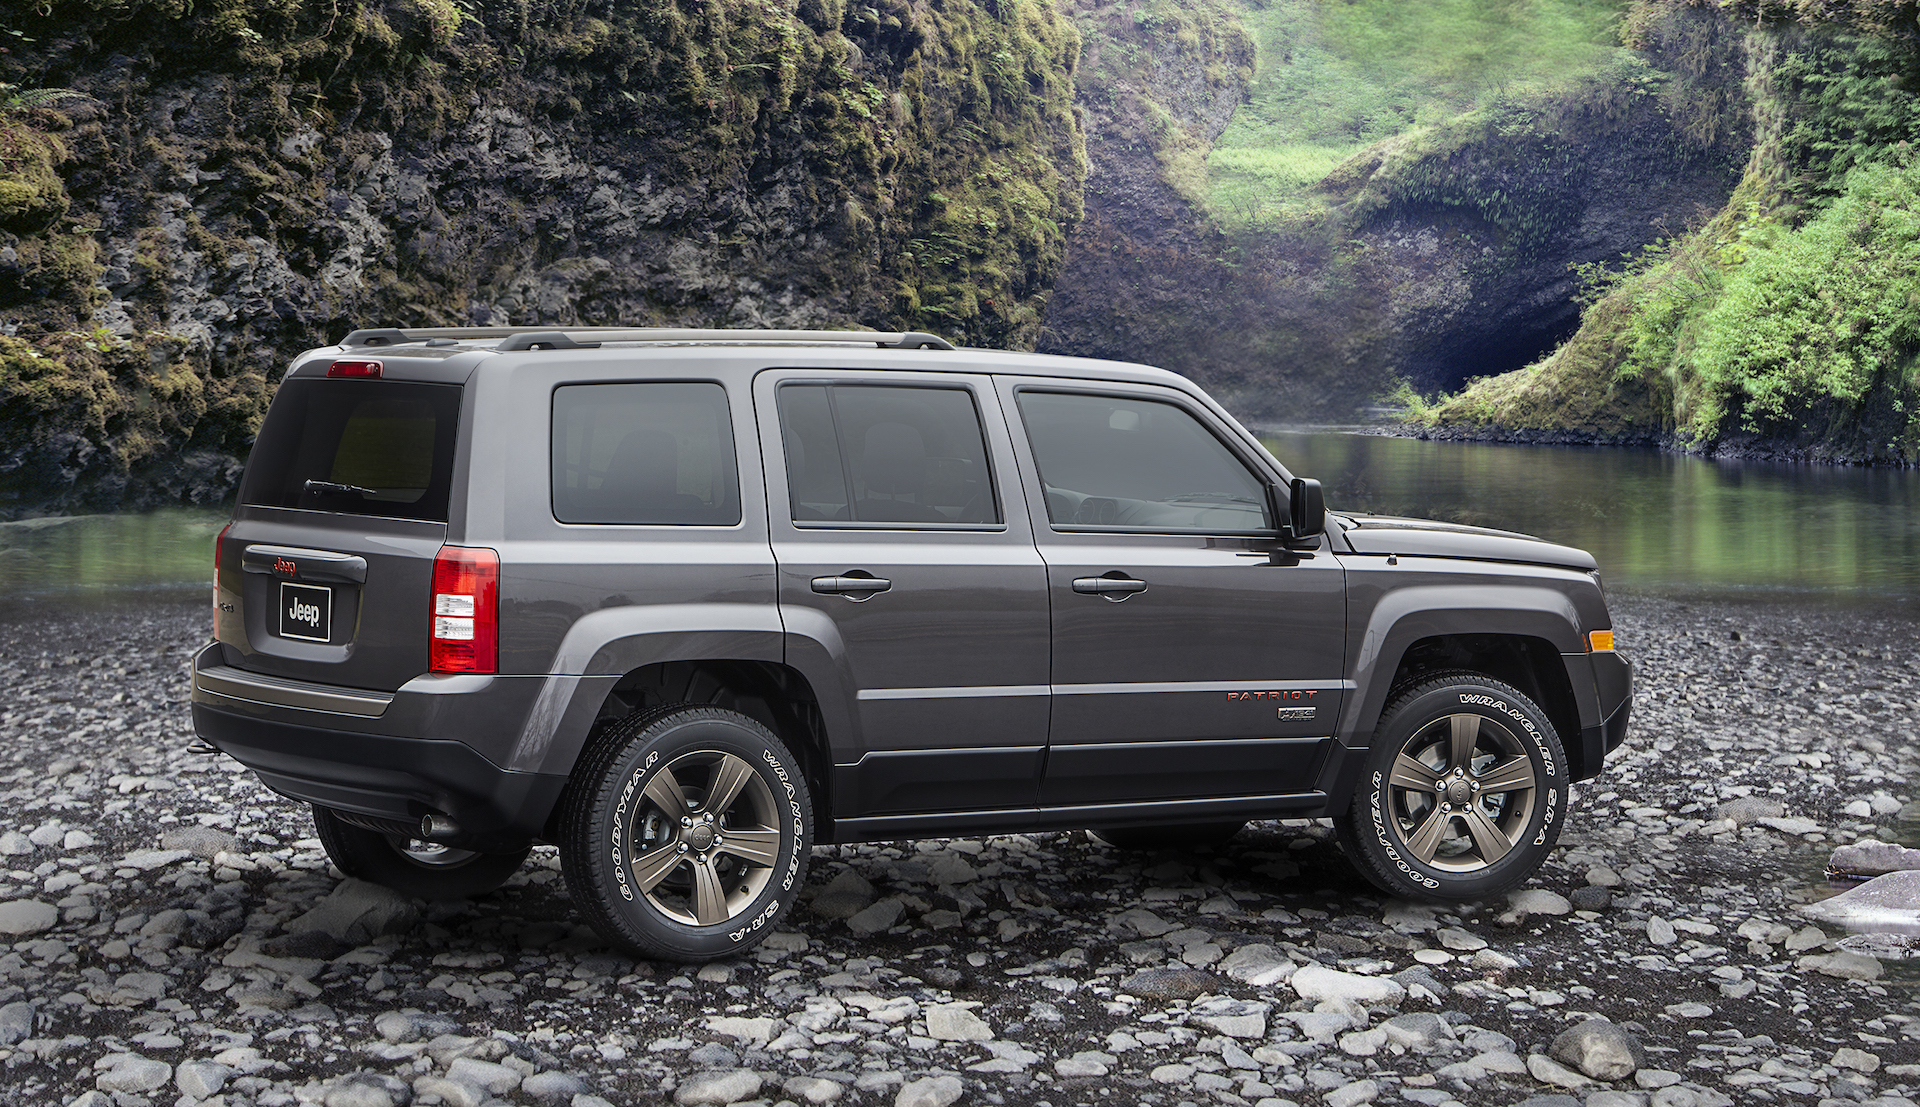 2017 Jeep Patriot Review Prices, Specs, and Photos The Car Connection